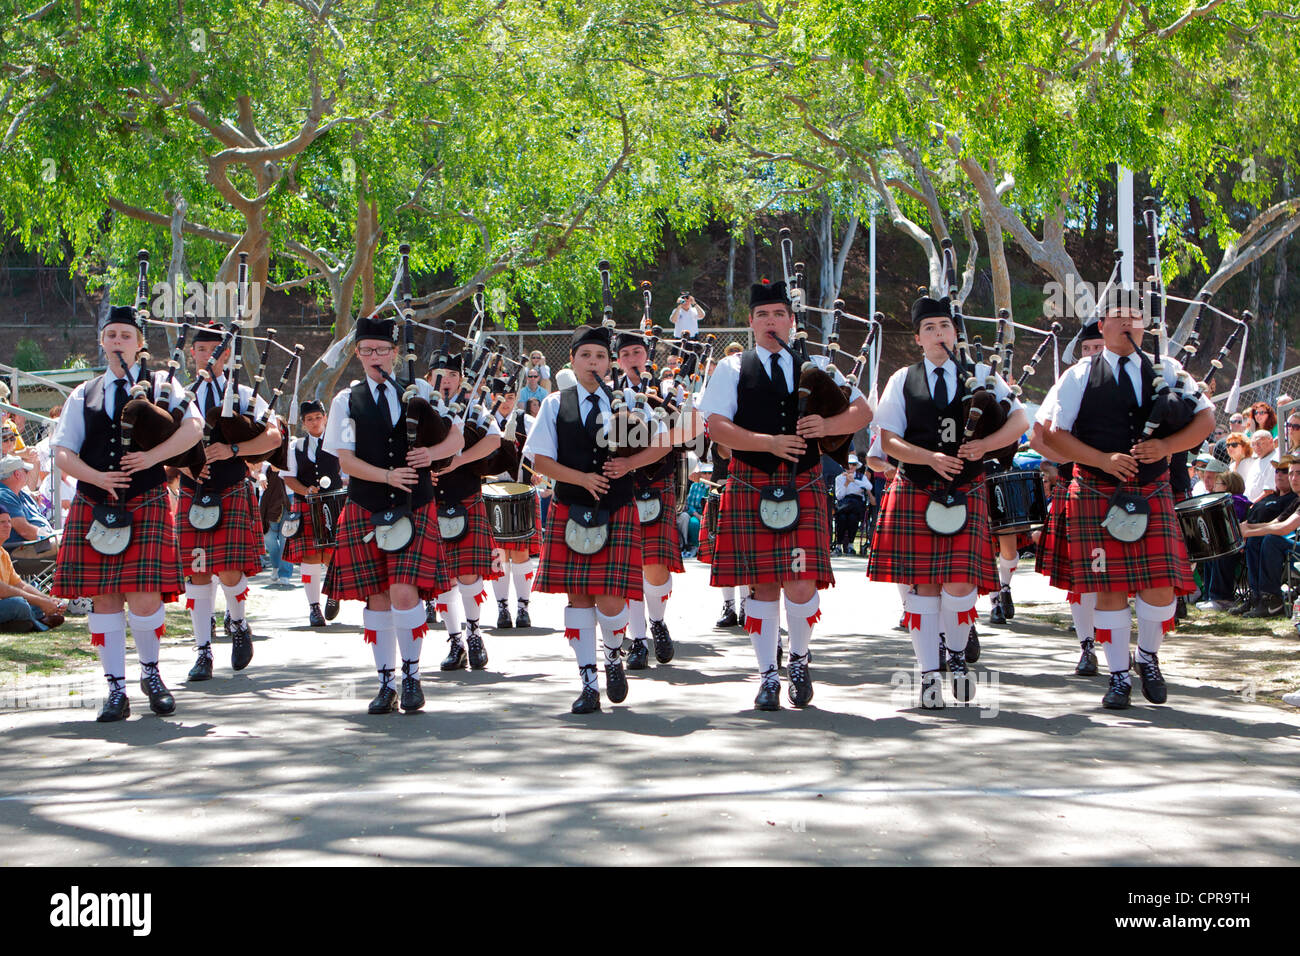 Pipers marching at the American Scottish Festival Costa Mesa California USA Stock Photo